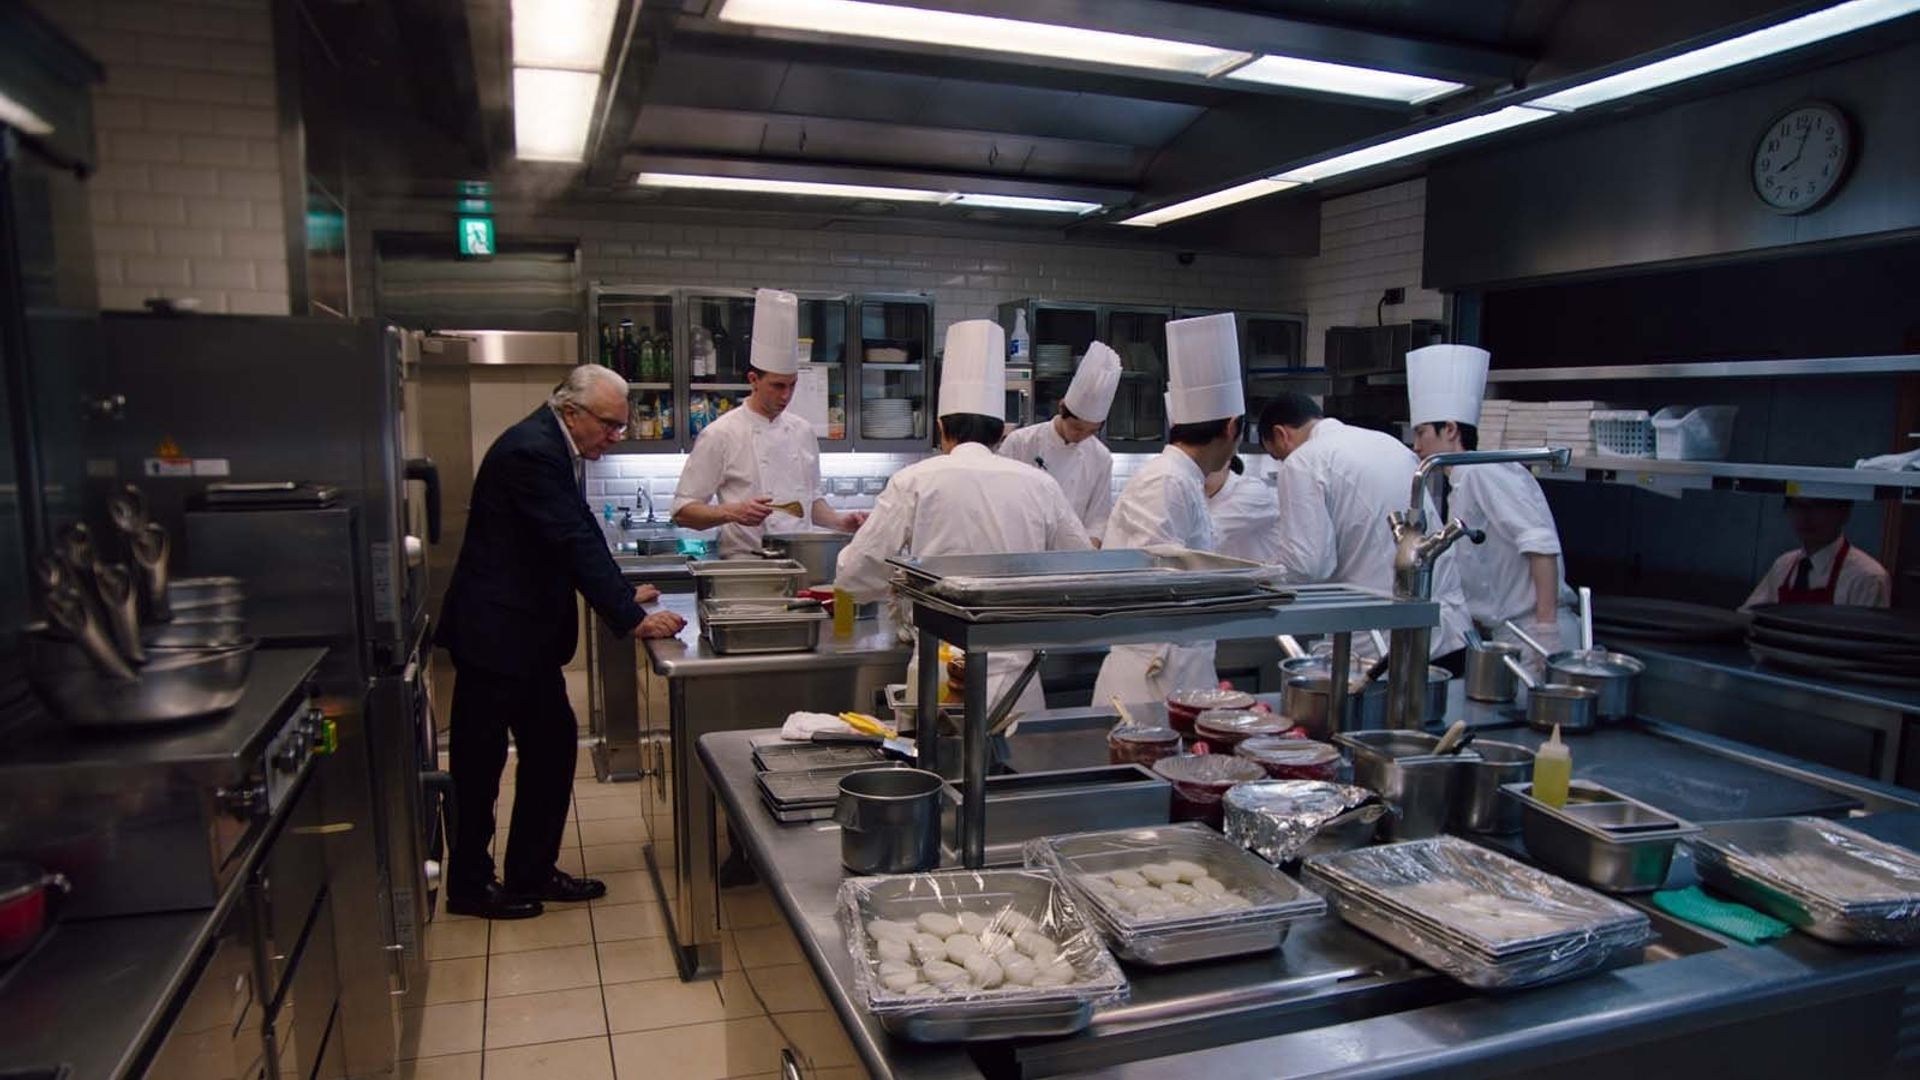 The Quest of Alain Ducasse background